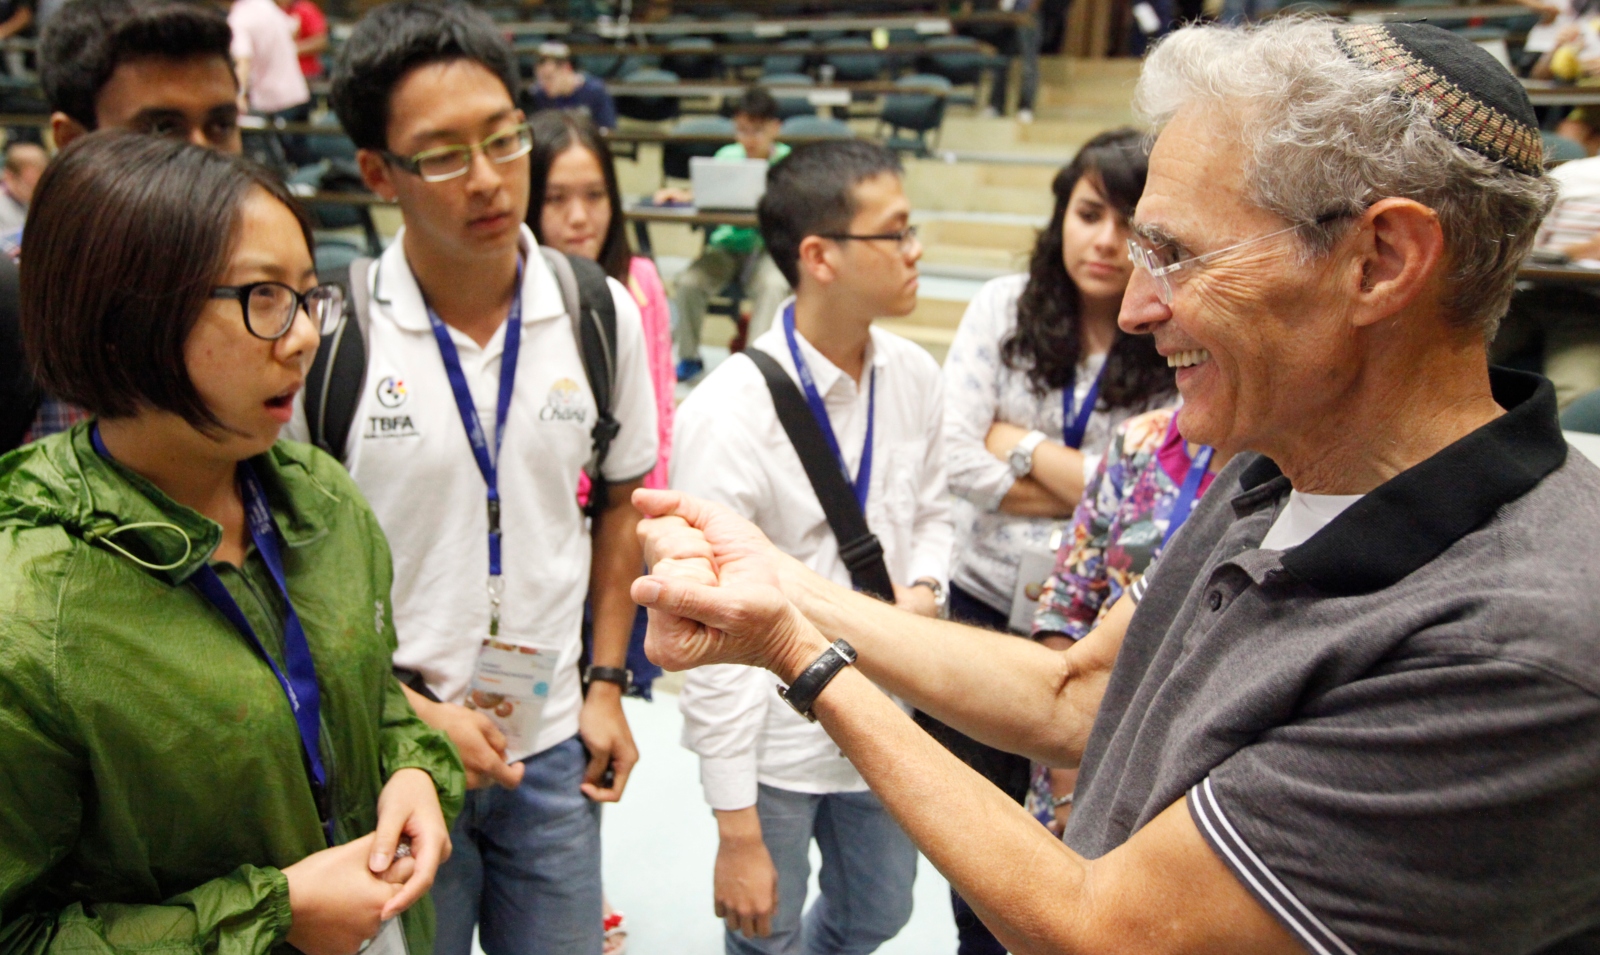 Hebrew University Prof. Howard Cedar with Asian summer students. Photo by Miriam Alster/FLASH90